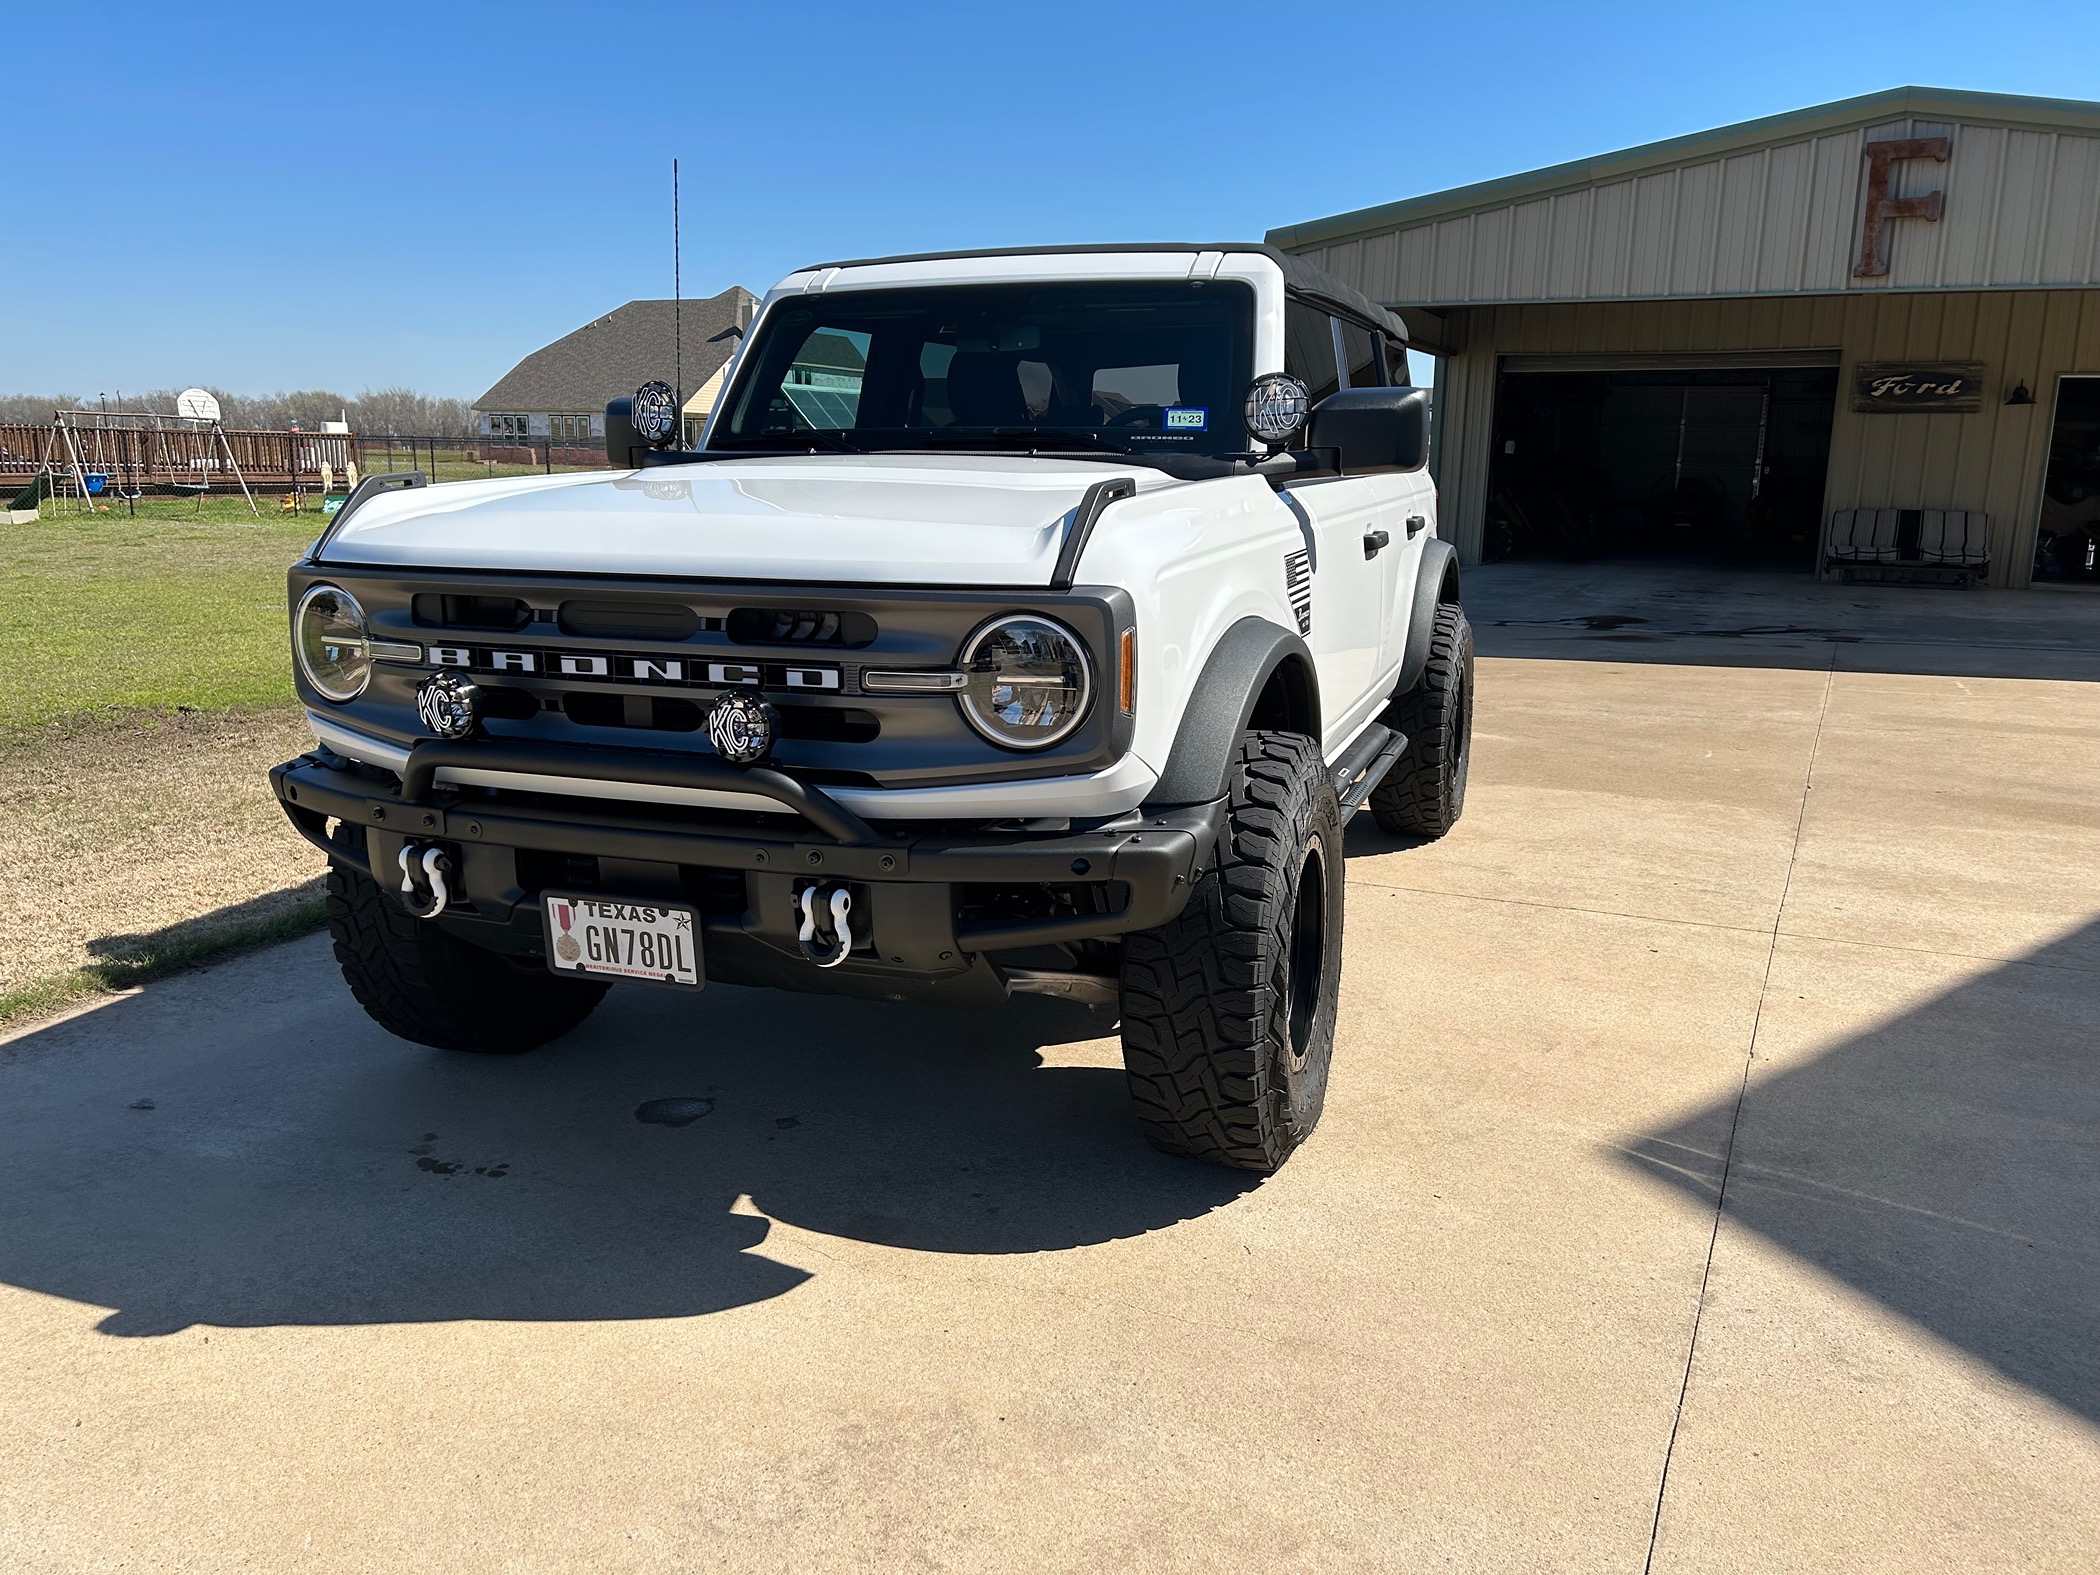 Ford Bronco Front End Friday! Show off your Bronco! IMG_0008